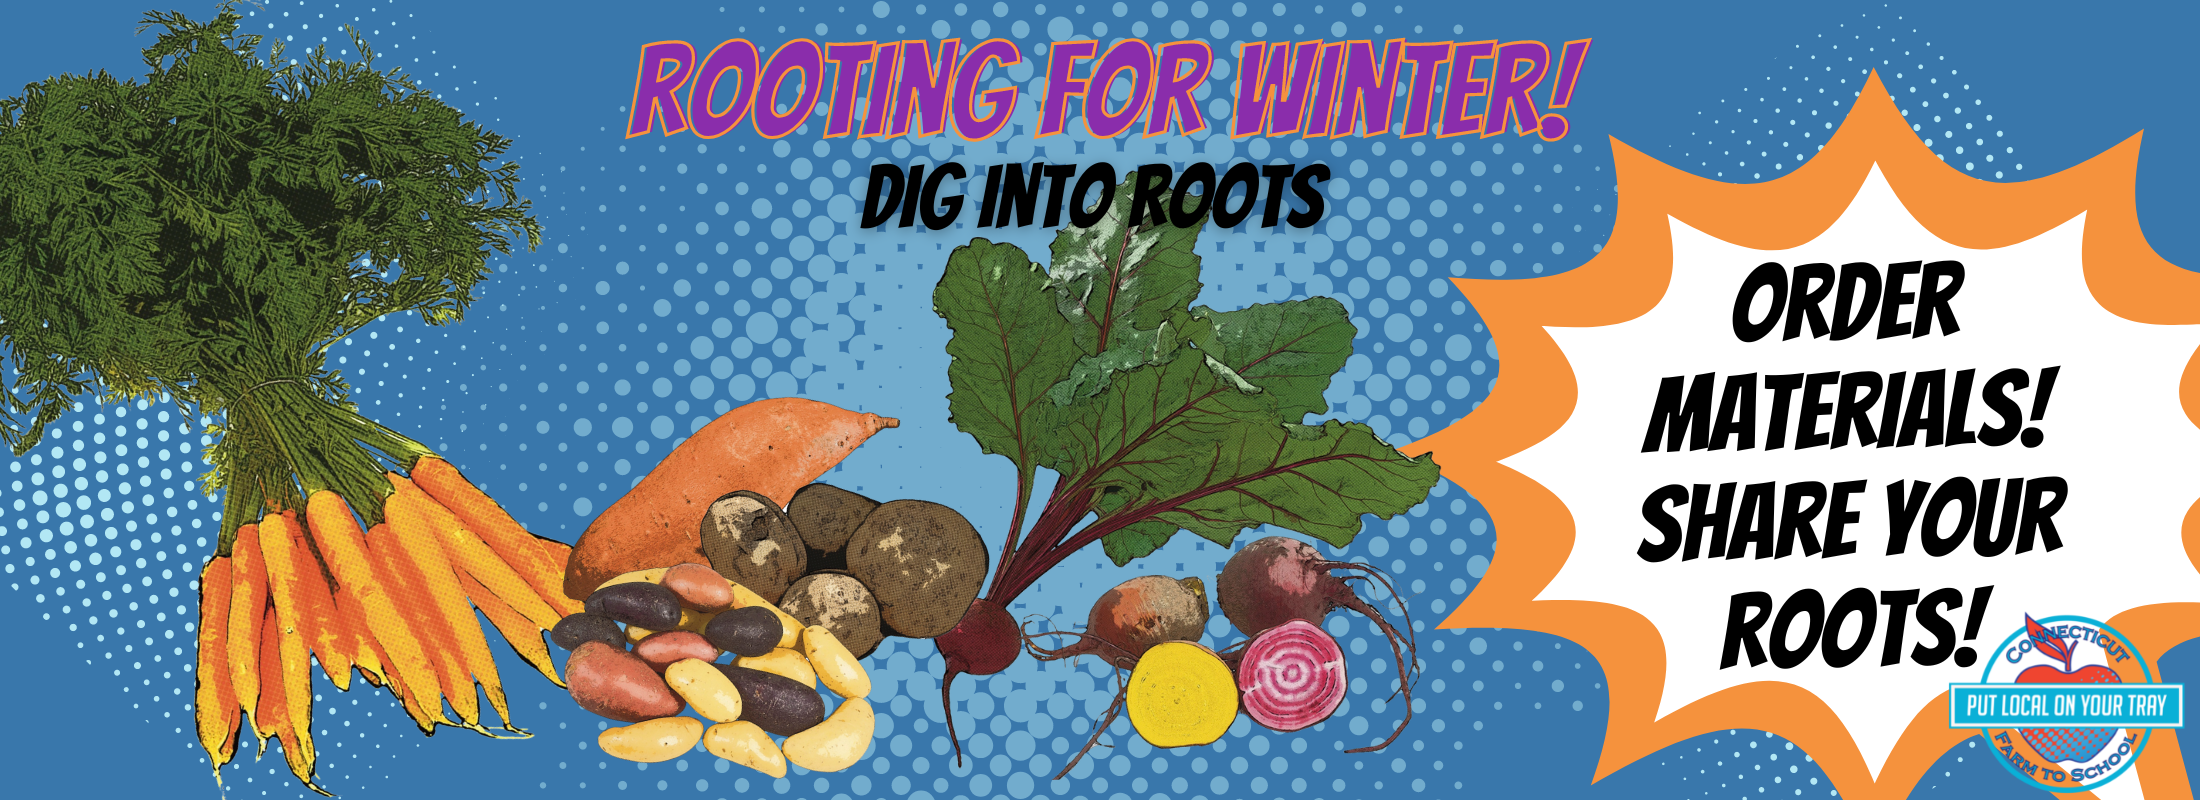 Rooting for Winter